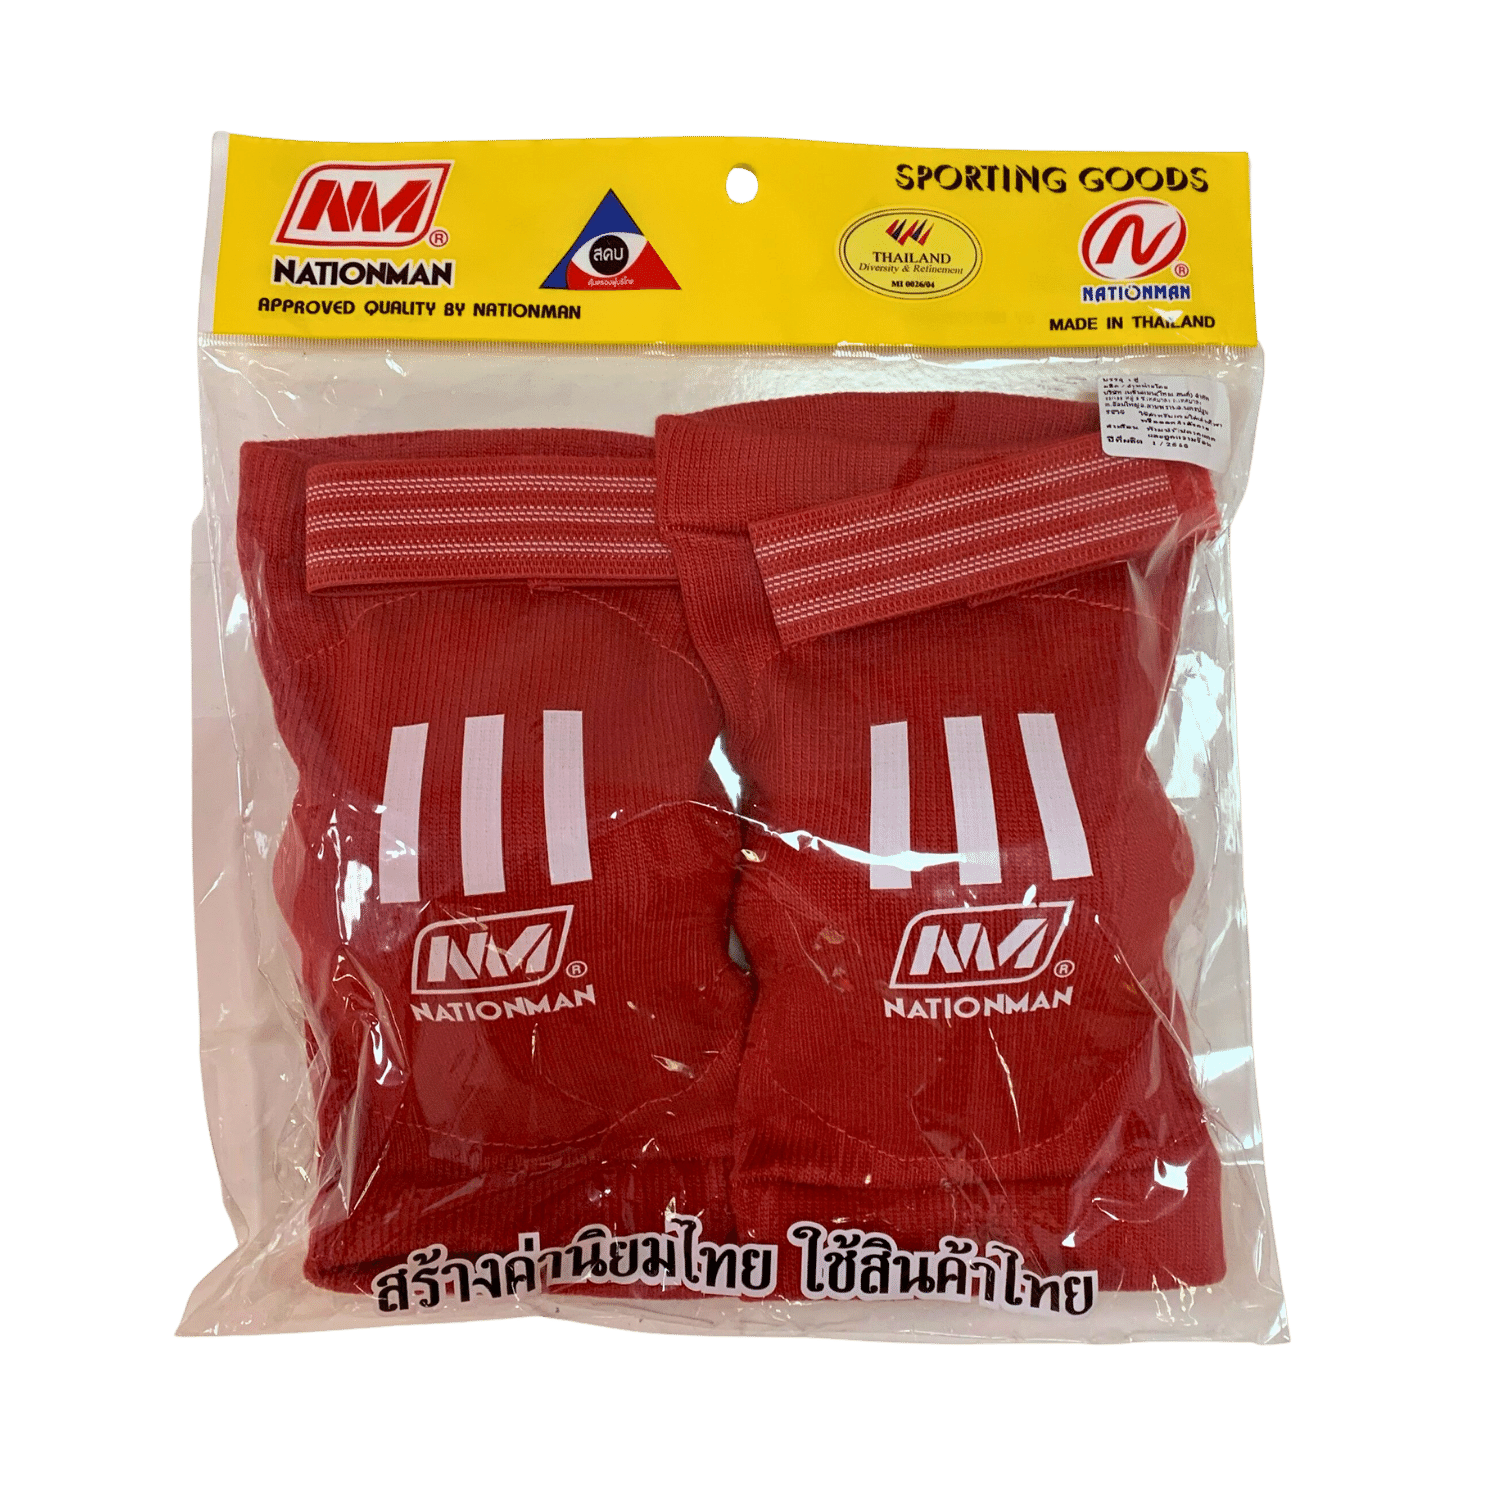 A pair of red Nationman Elbow Pads in a package, perfect for Muay Thai training.